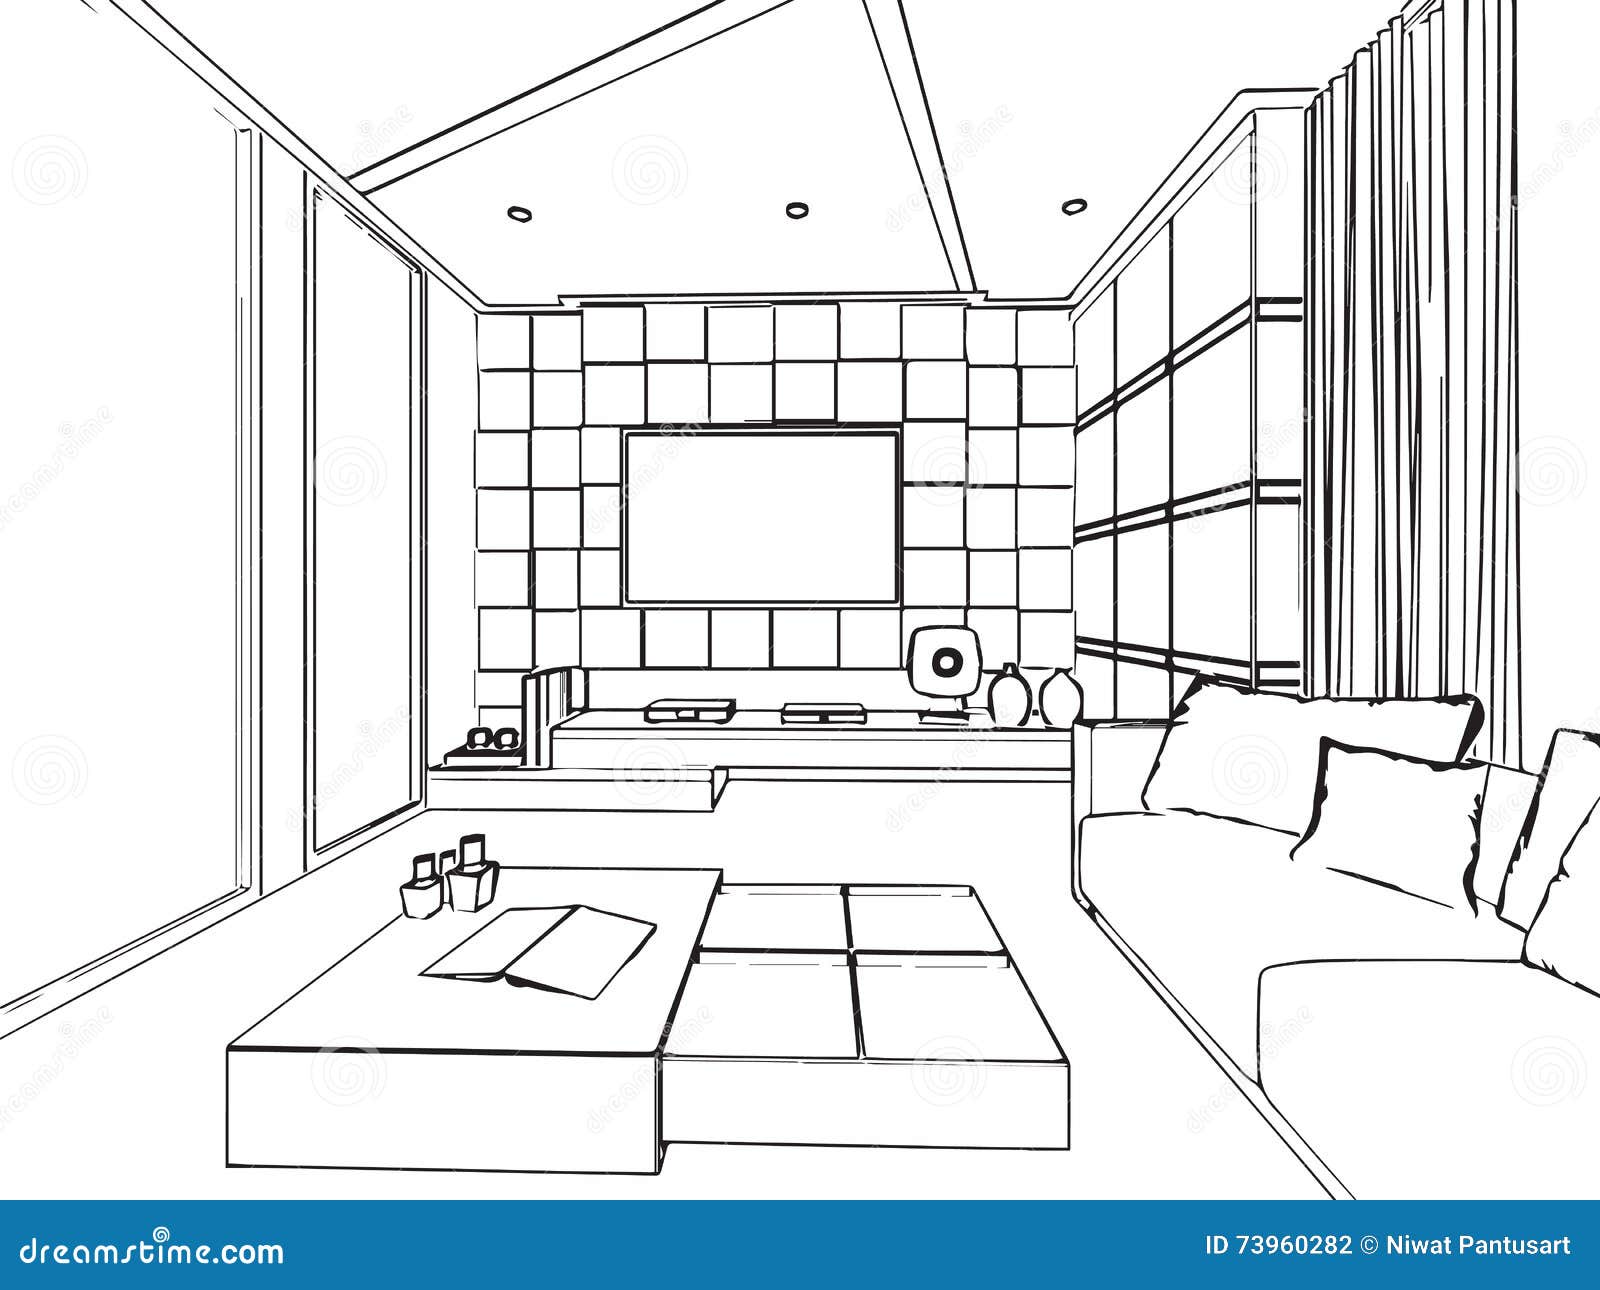 Outline Sketch Drawing Interior Perspective Of House Stock